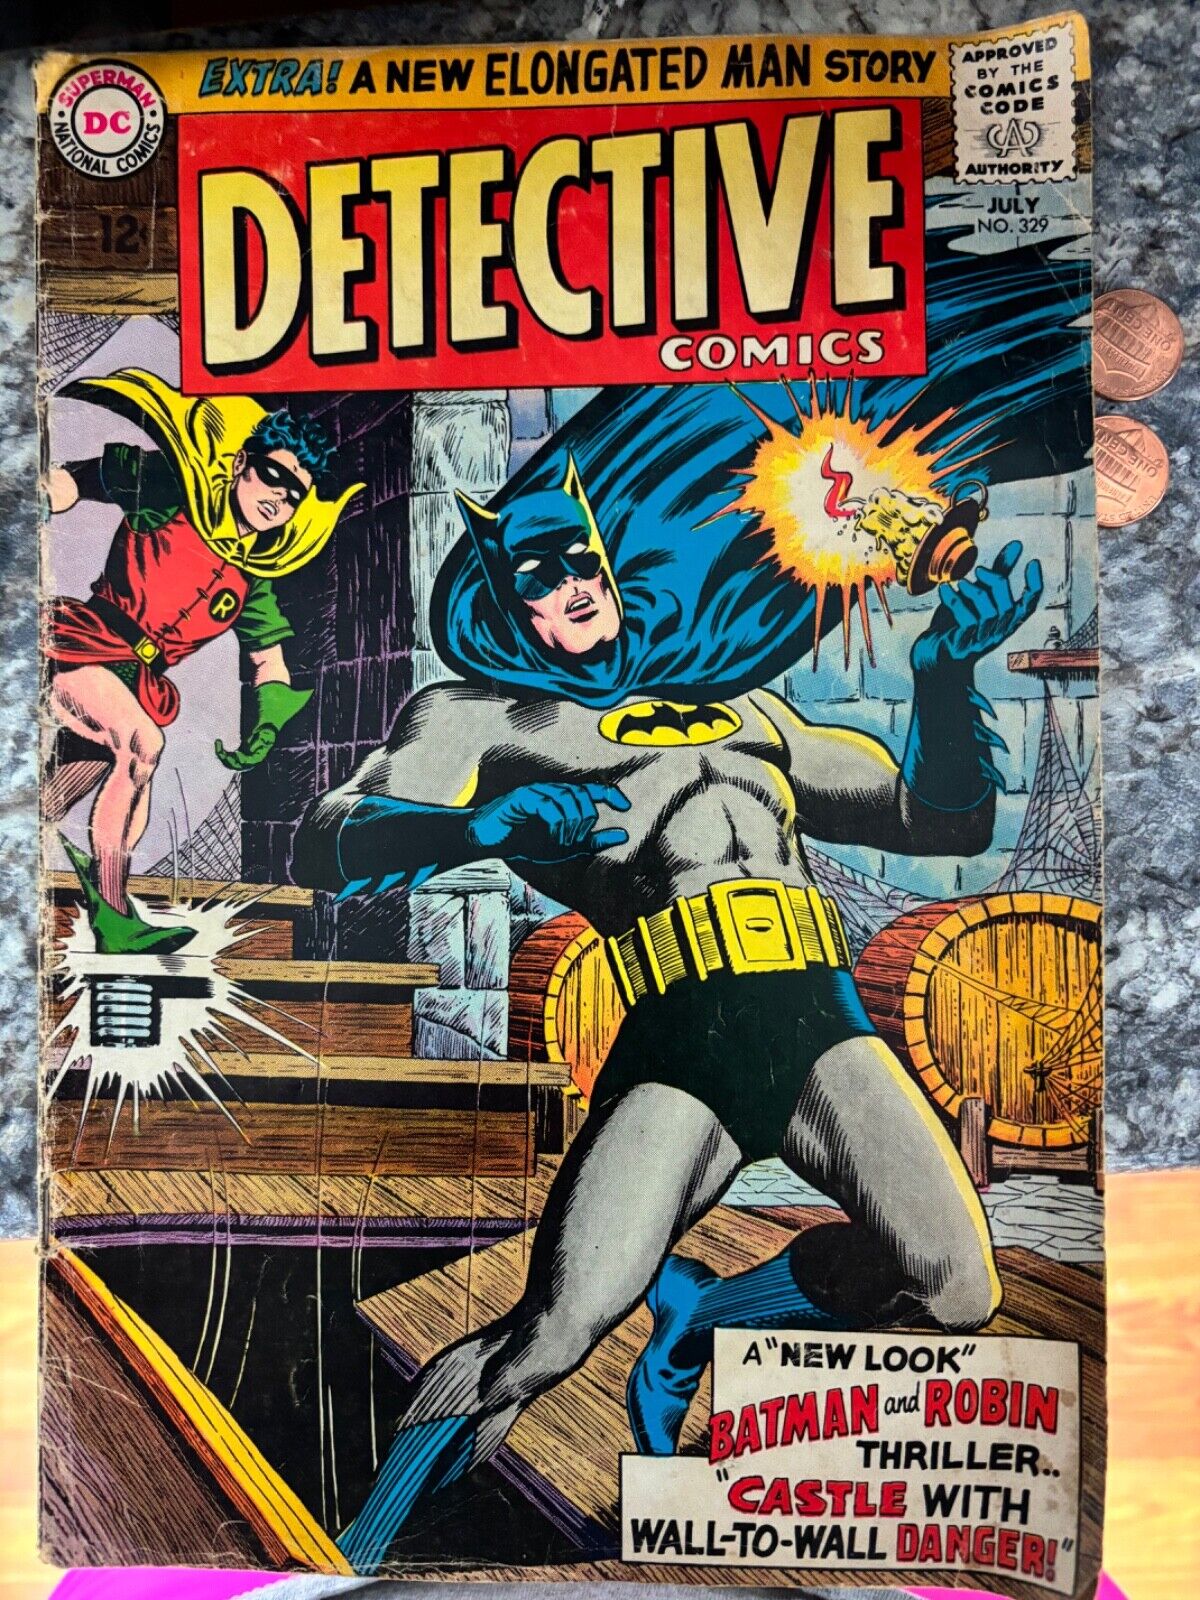 Detective Comics  # 329   VERY GOOD   July 1964  Infantino, Anderson cover & art